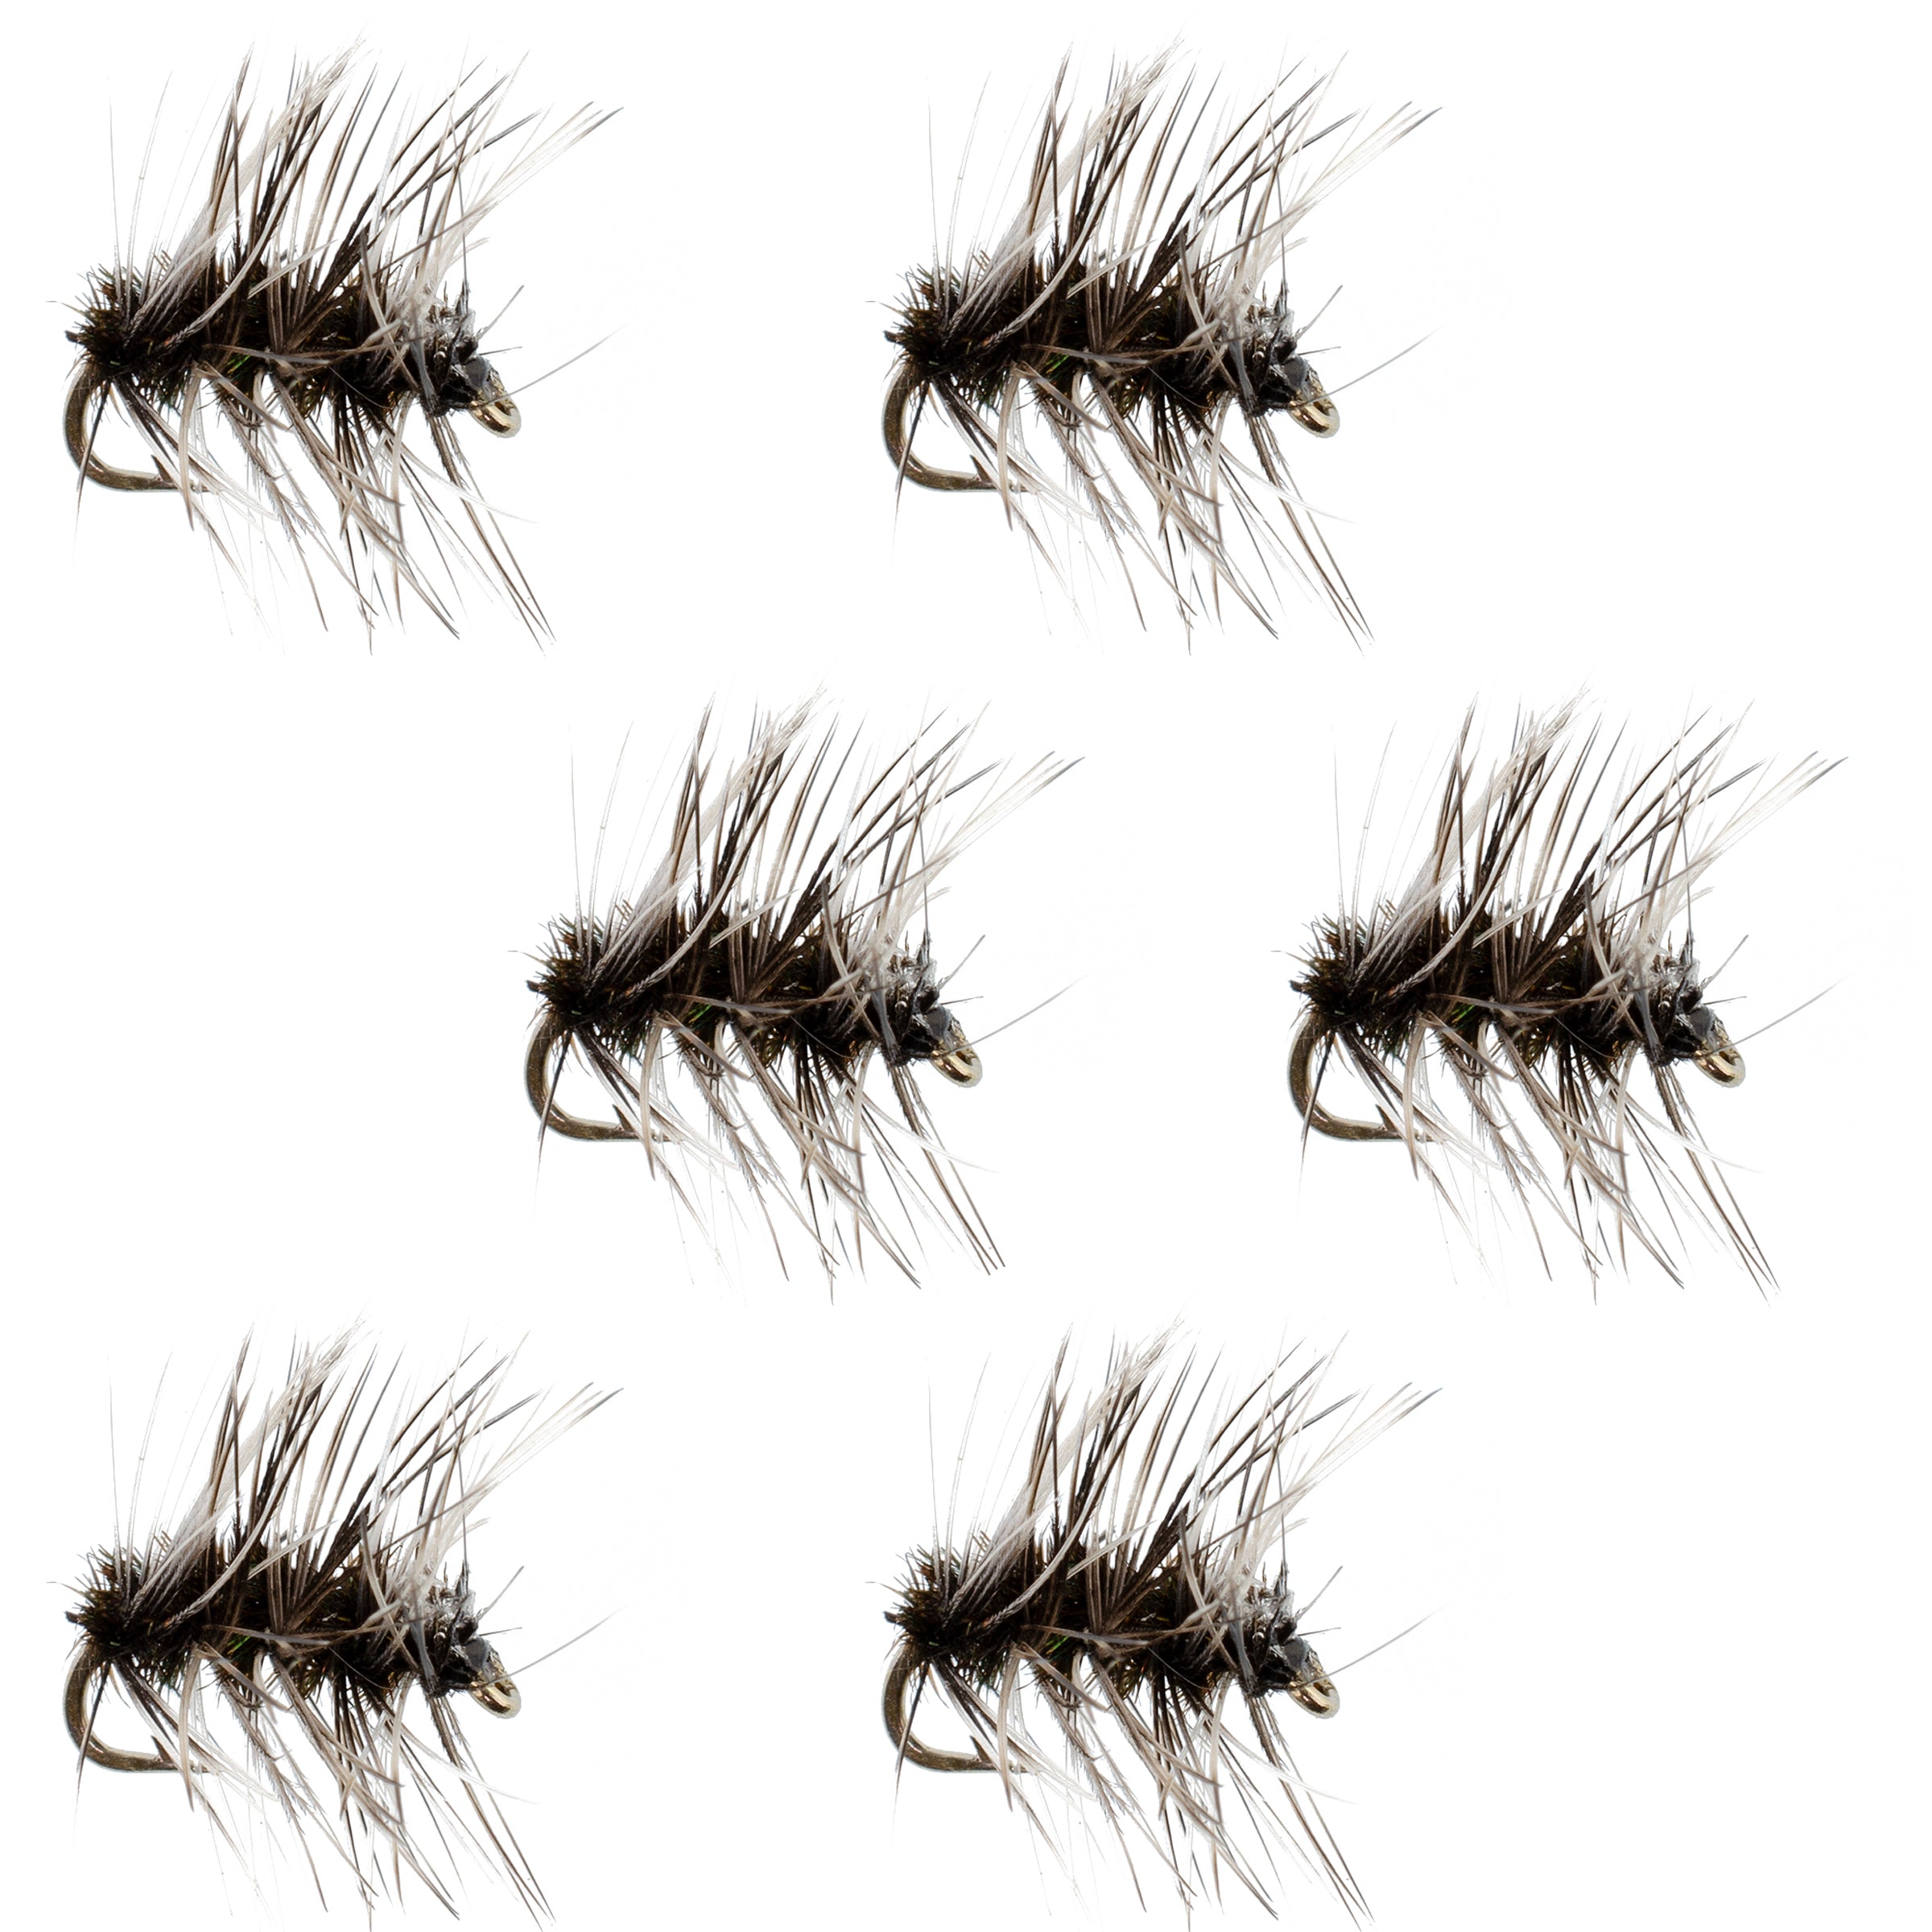 Griffiths Gnat Midge Trout Dry Fly Fishing Flies - 6 Flies Size 20